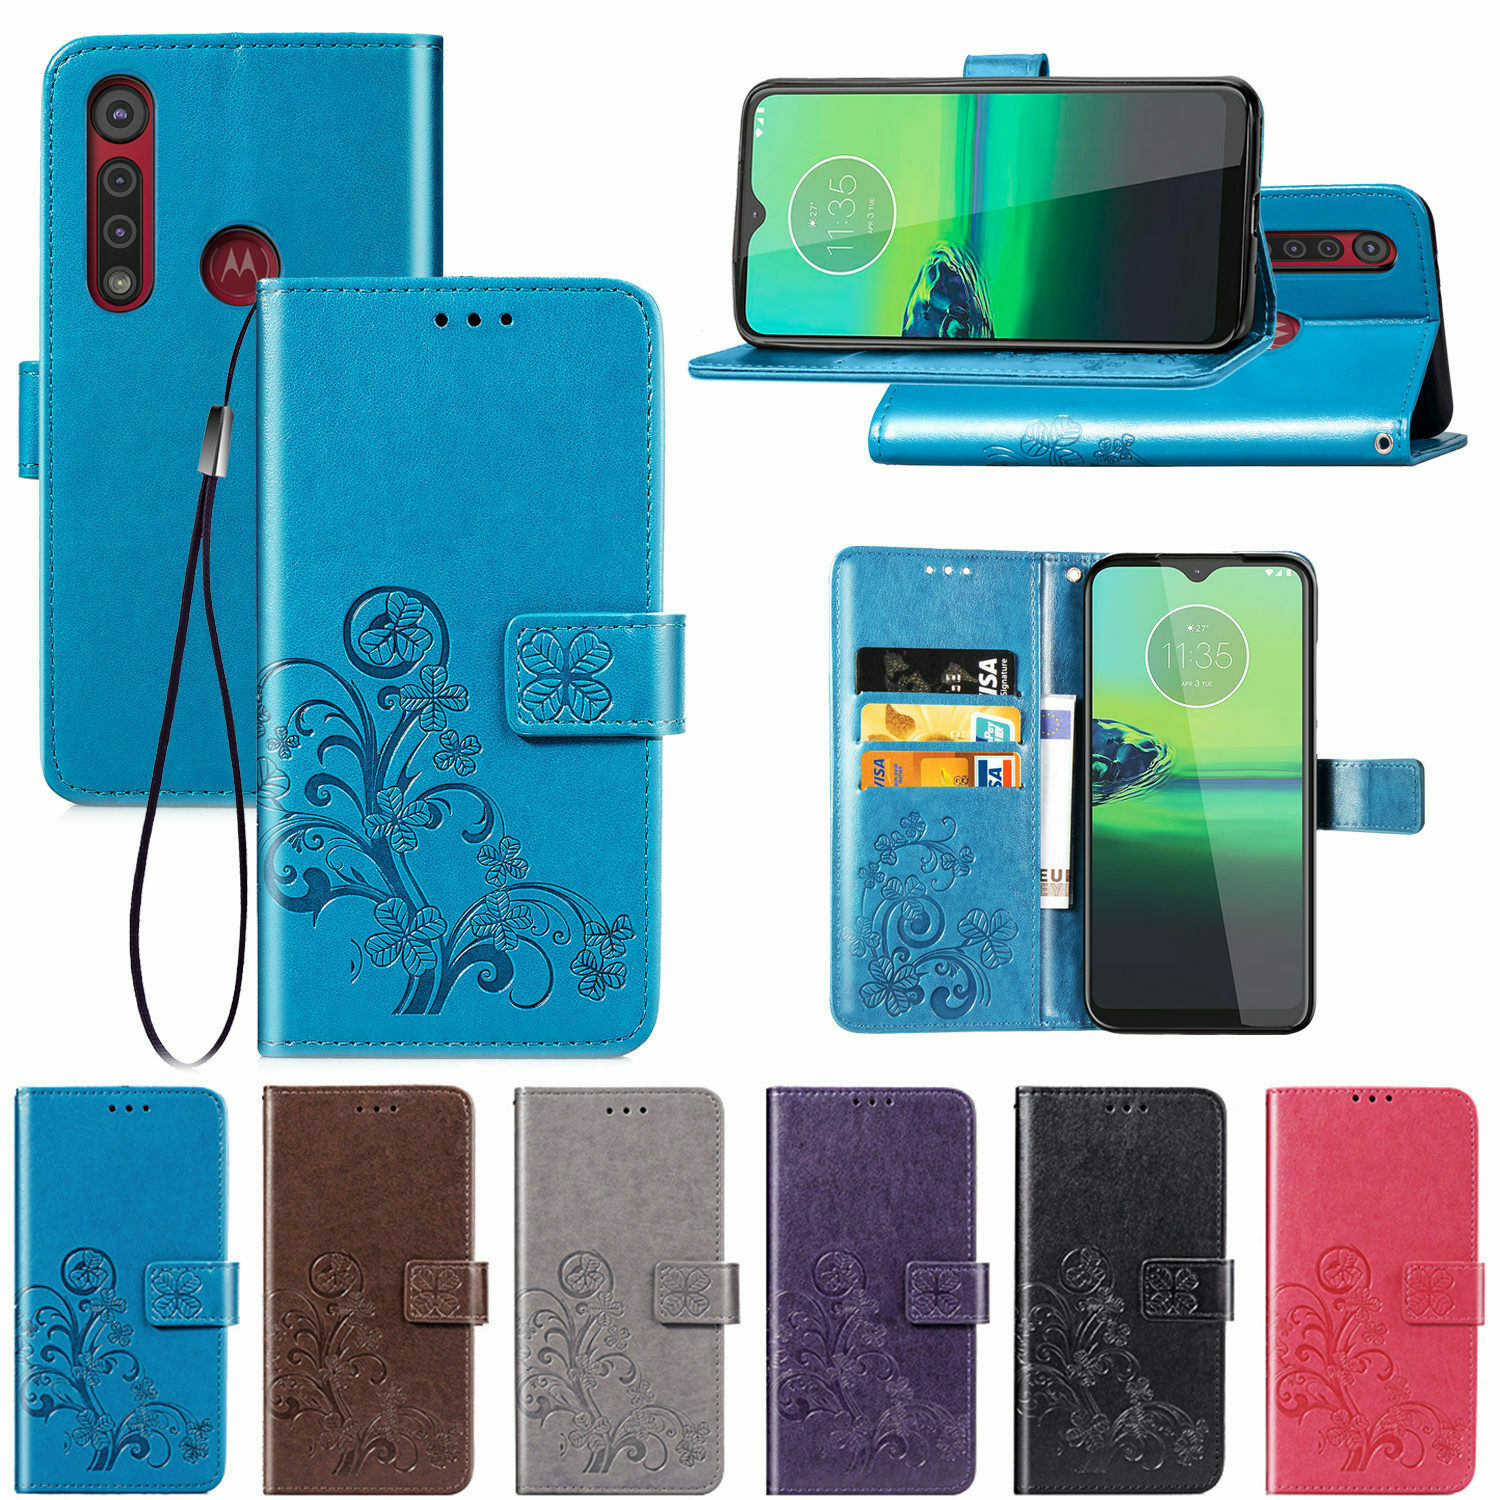 Unbranded/generic - For motorola moto g8 plus g8 e6 play magnetic flip leather wallet case cover